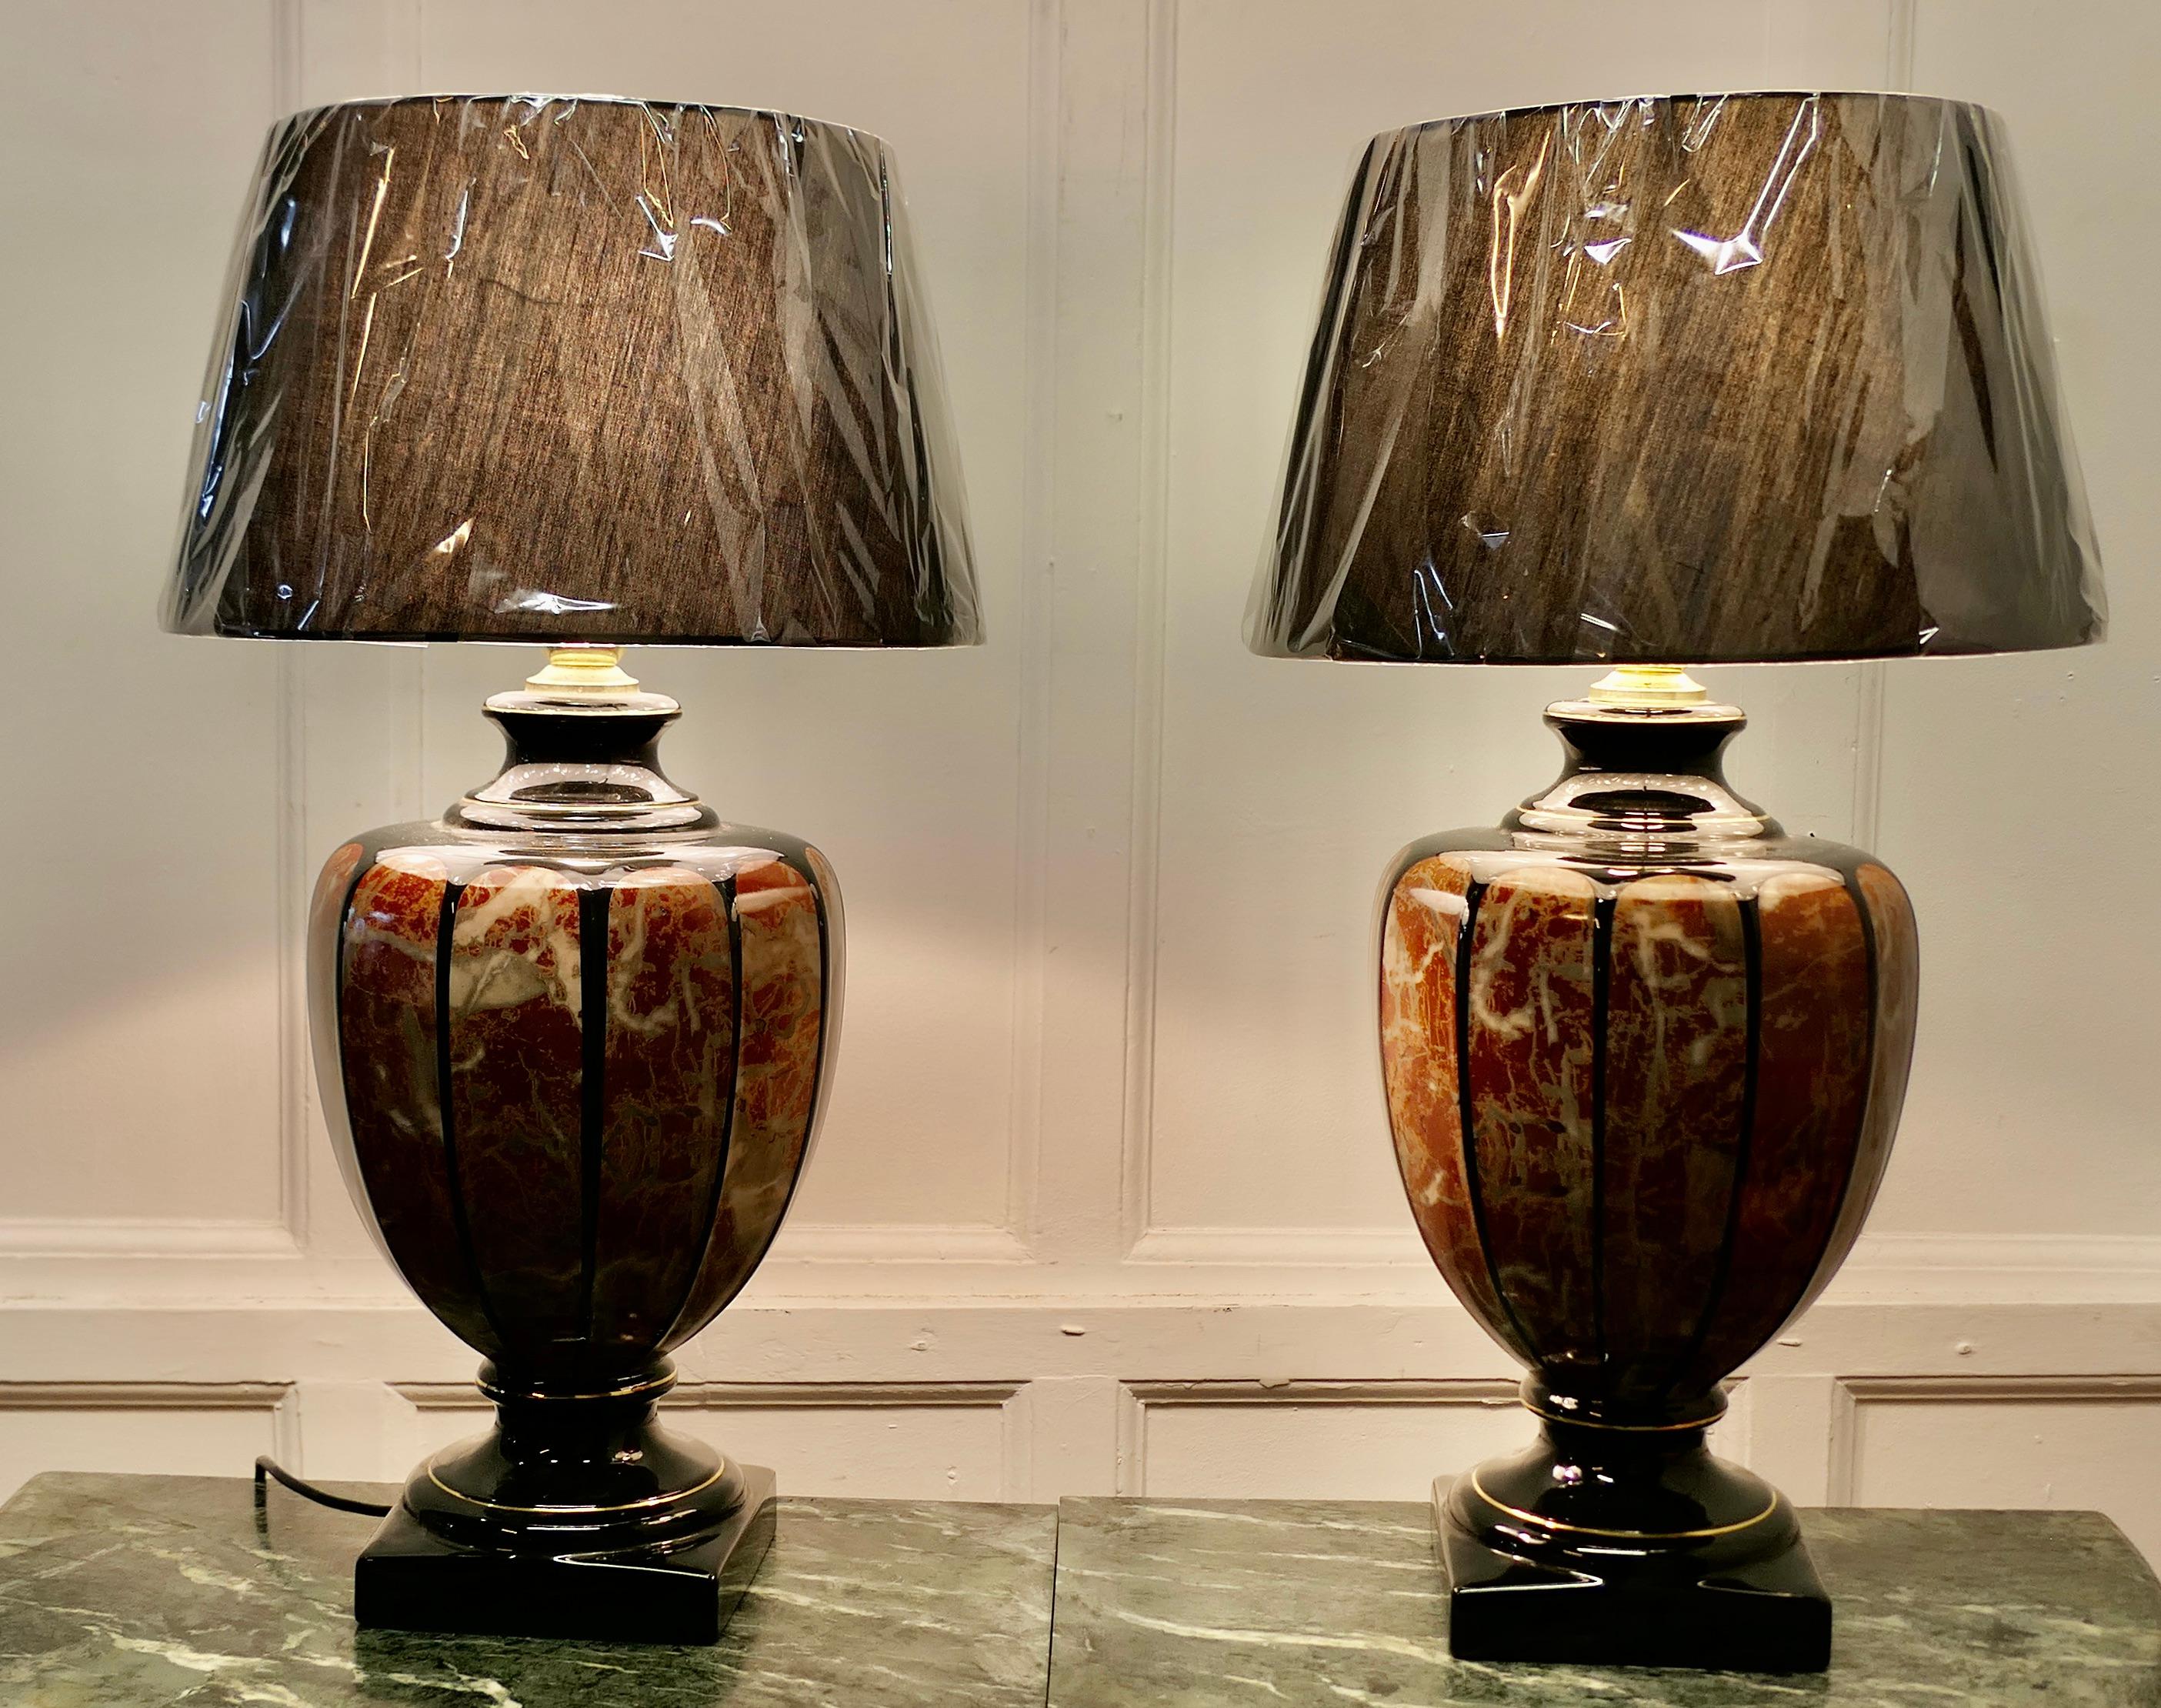 A Pair of Italian Simulated Marble Table Lamps 

The lamps stand on a square foot and have a large baluster ceramic bowl which is decorated as simulated Italian marble  

The lamps are black and gold with all the Rose colours seen in Italian Marble